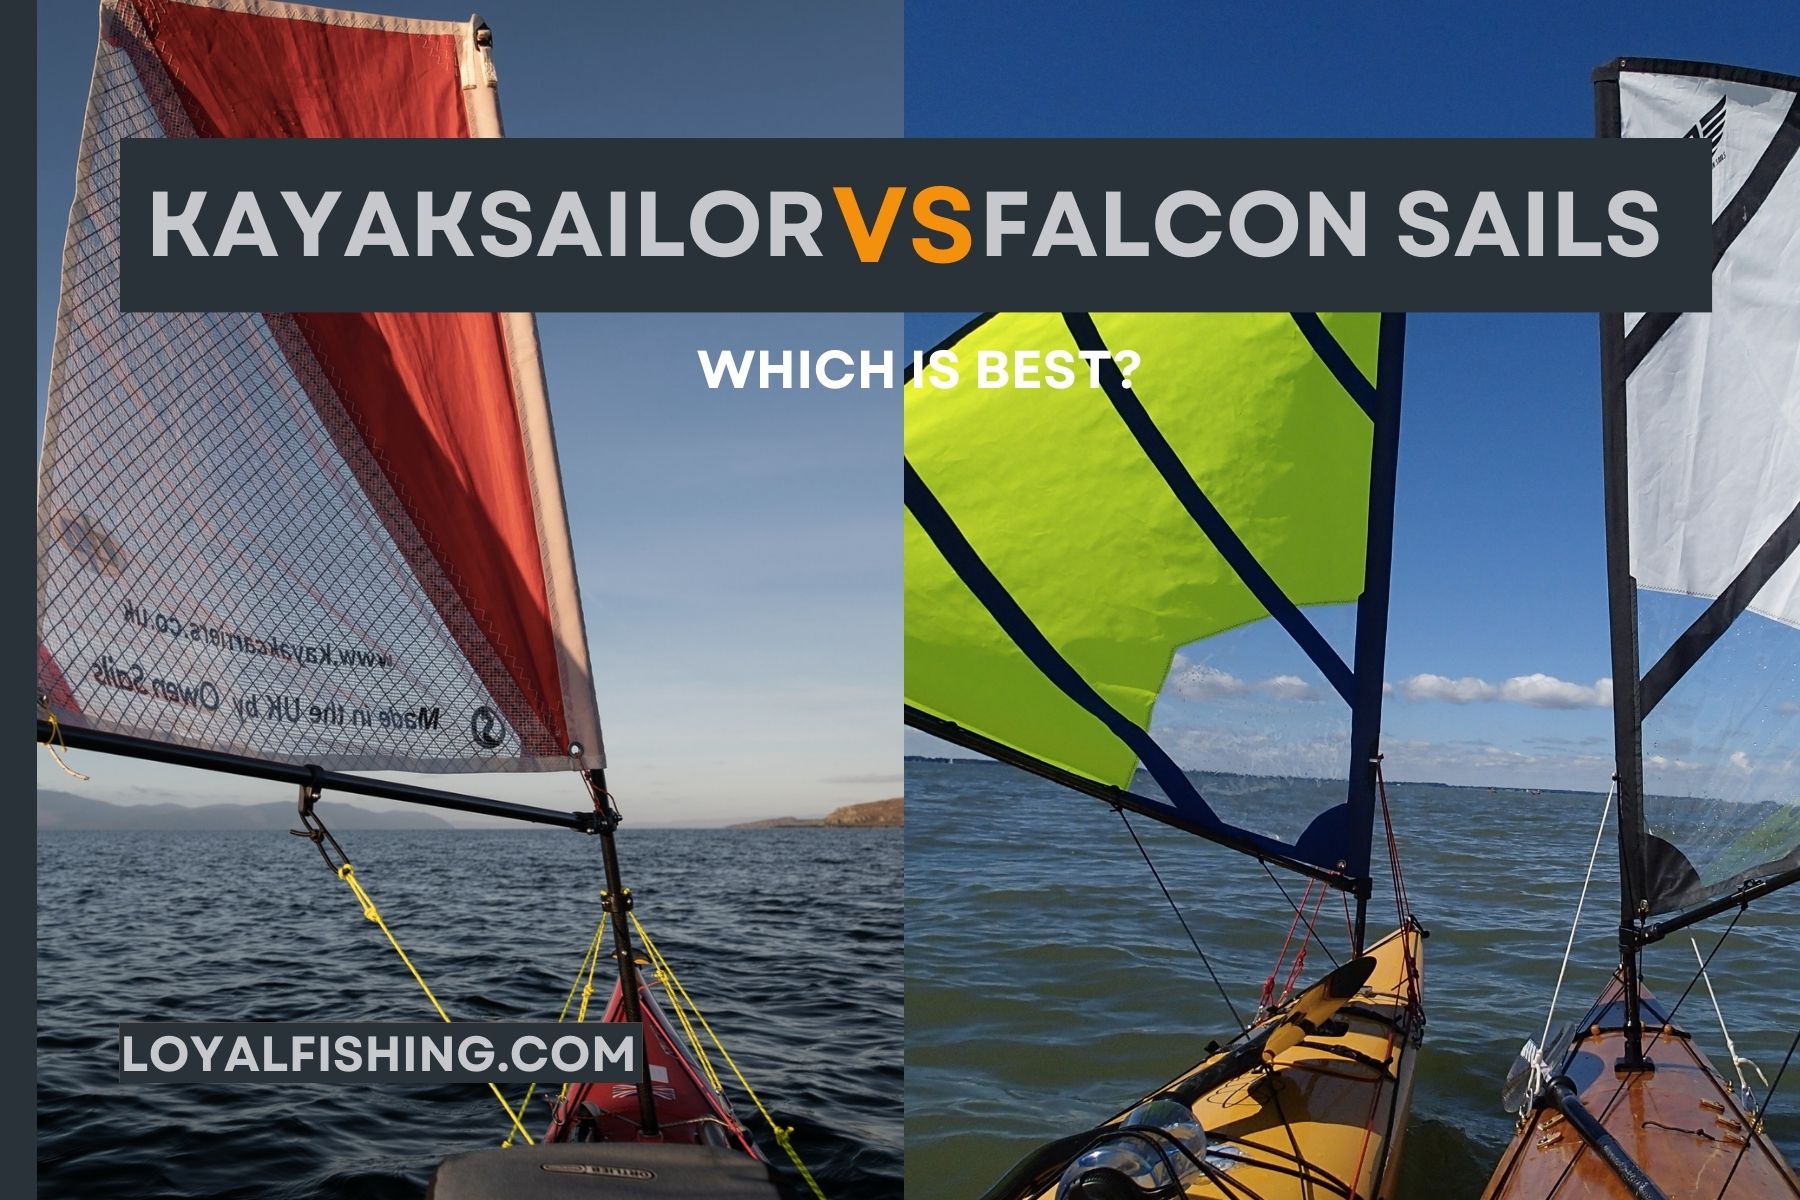 Kayaksailor VS Falcon Sails: Which is Better for Sailing?